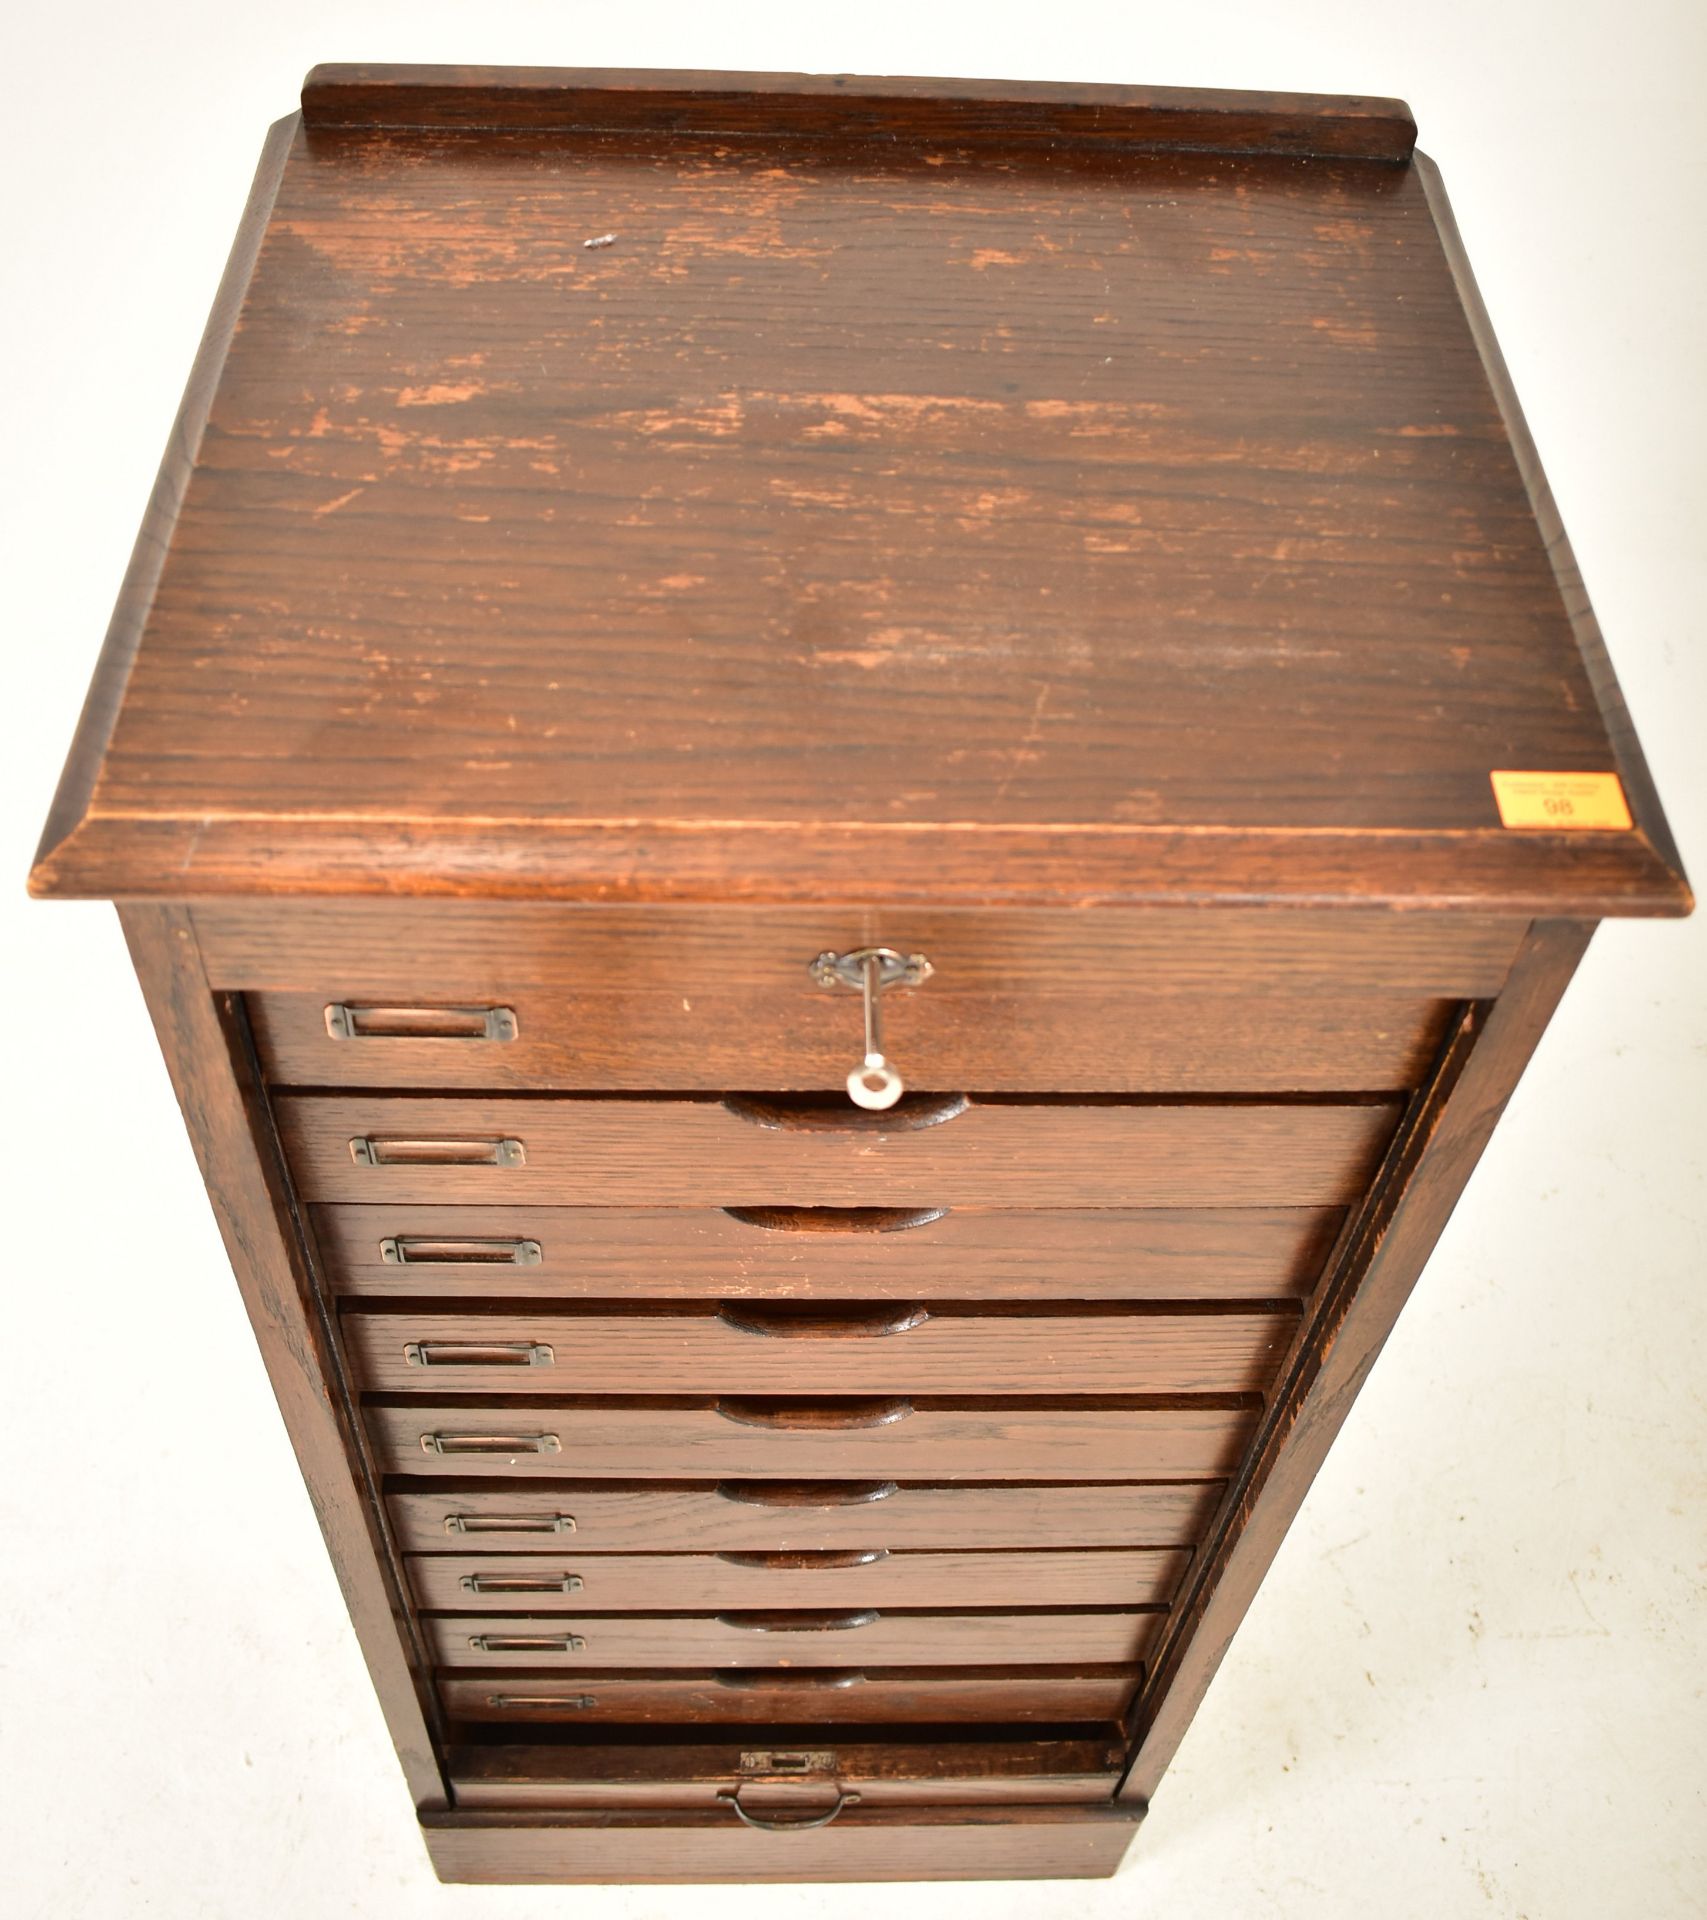 EARLY 20TH CENTURY ART DECO OAK PEDESTAL CABINET CHEST - Image 3 of 6